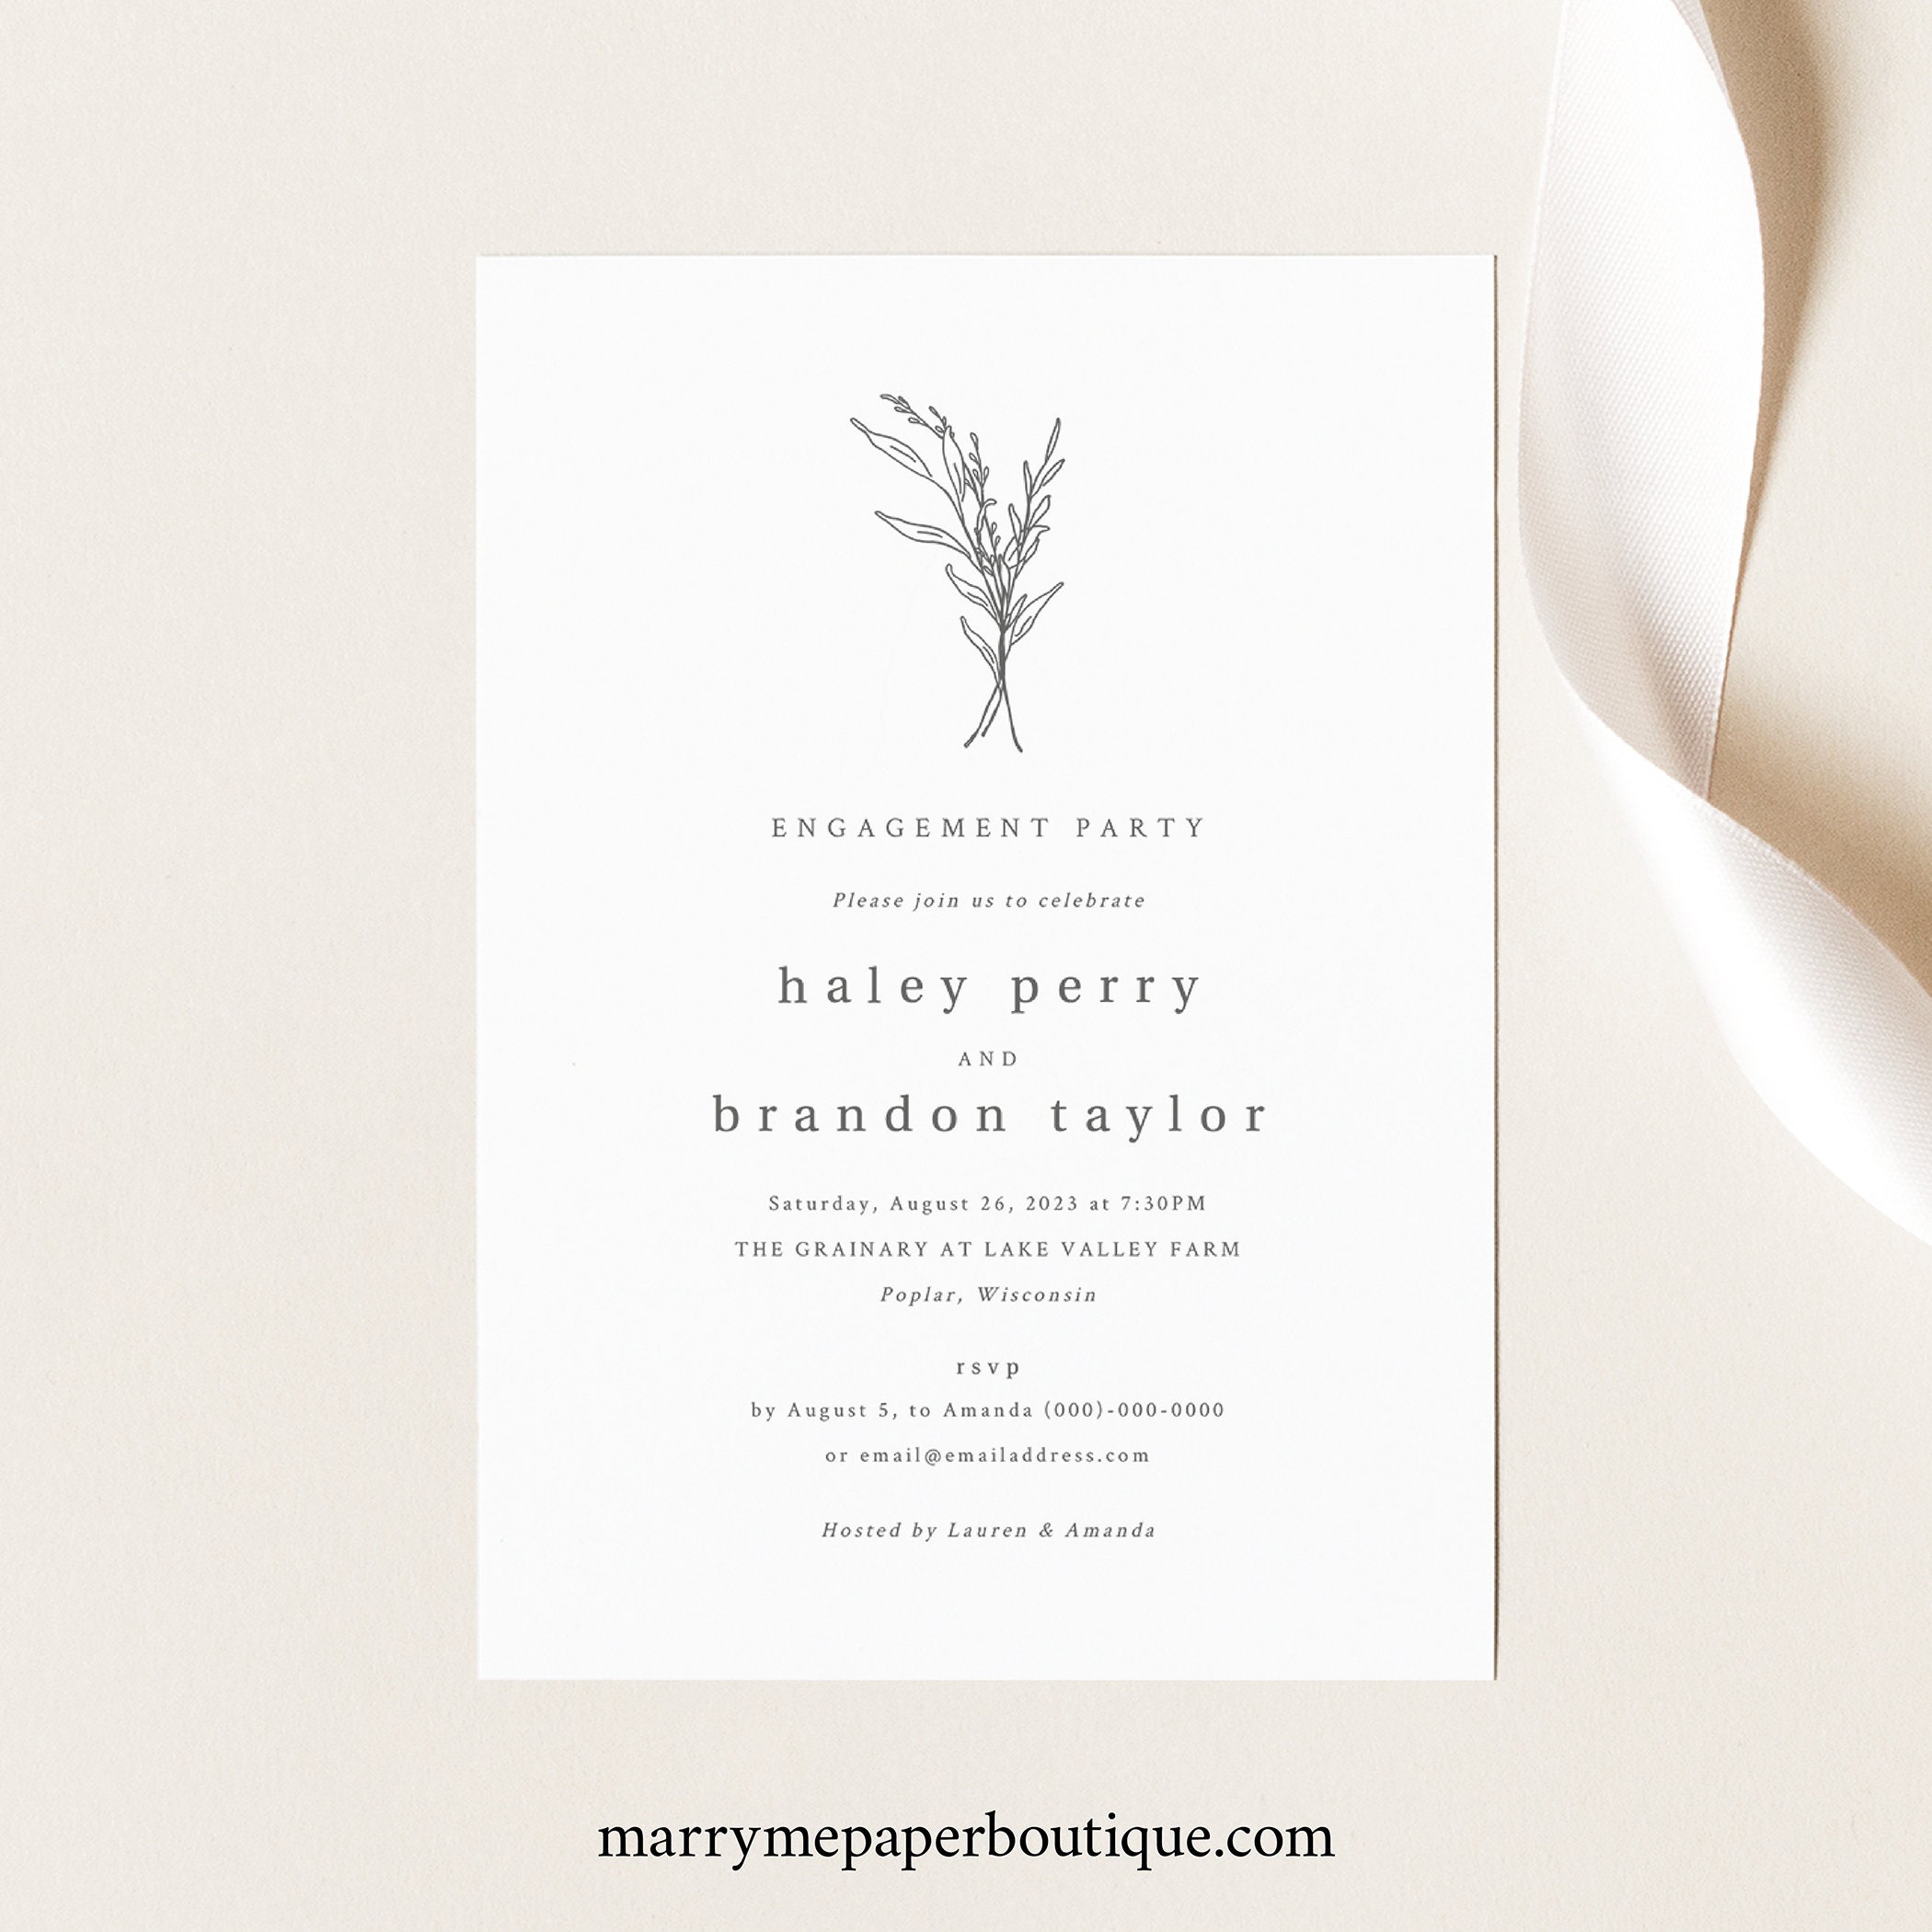 Boho Engagement Party Invitations Modern Invite Printed or Printable Greenery Engagement Party Invitation Rustic Invites